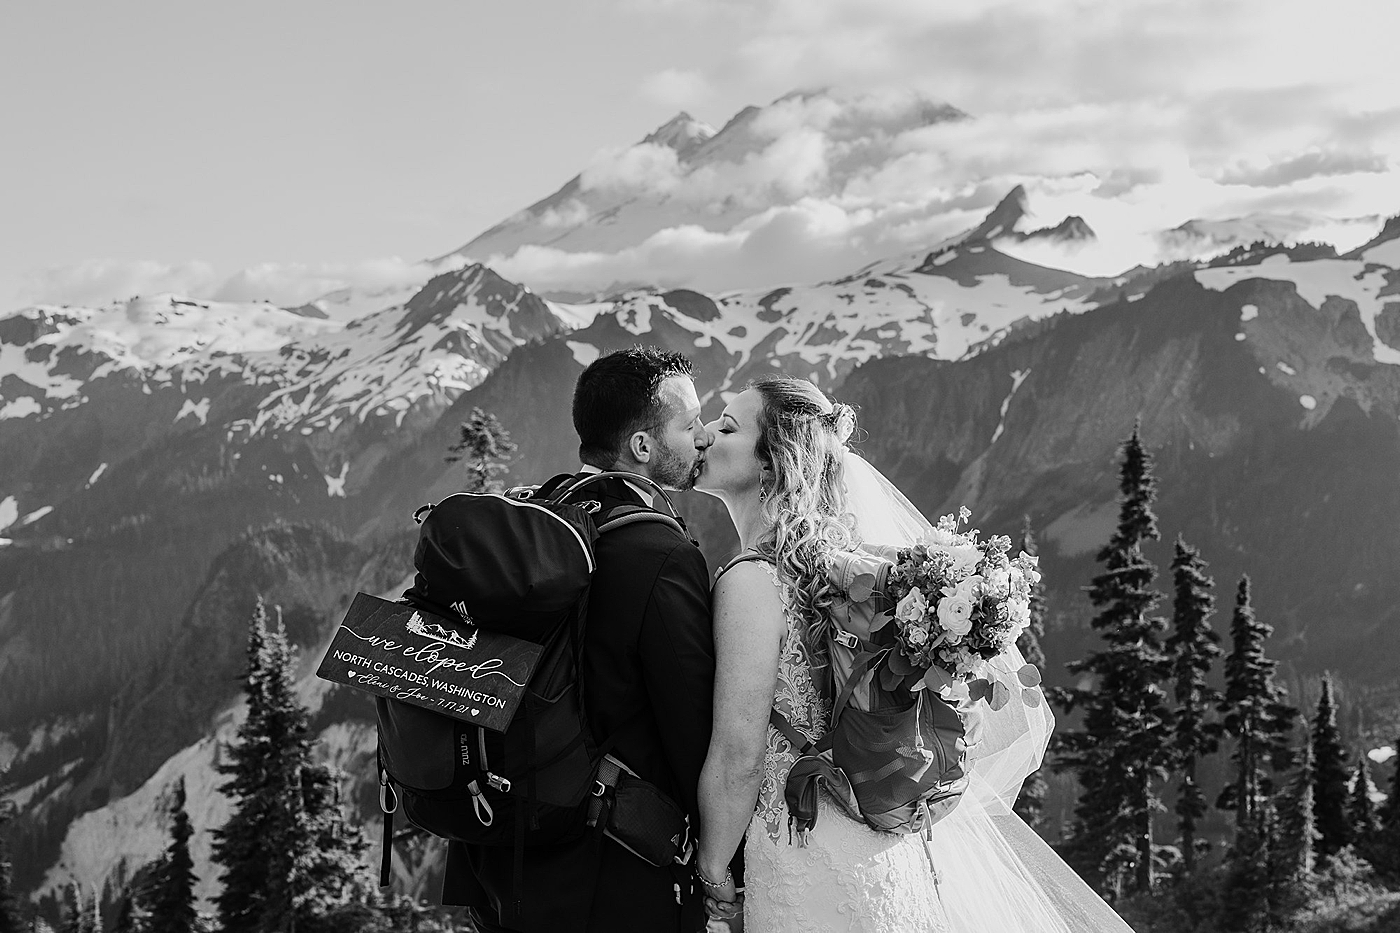 Couple at the top of Artist Point with elopement sign. Photo by Megan Montalvo Photography.